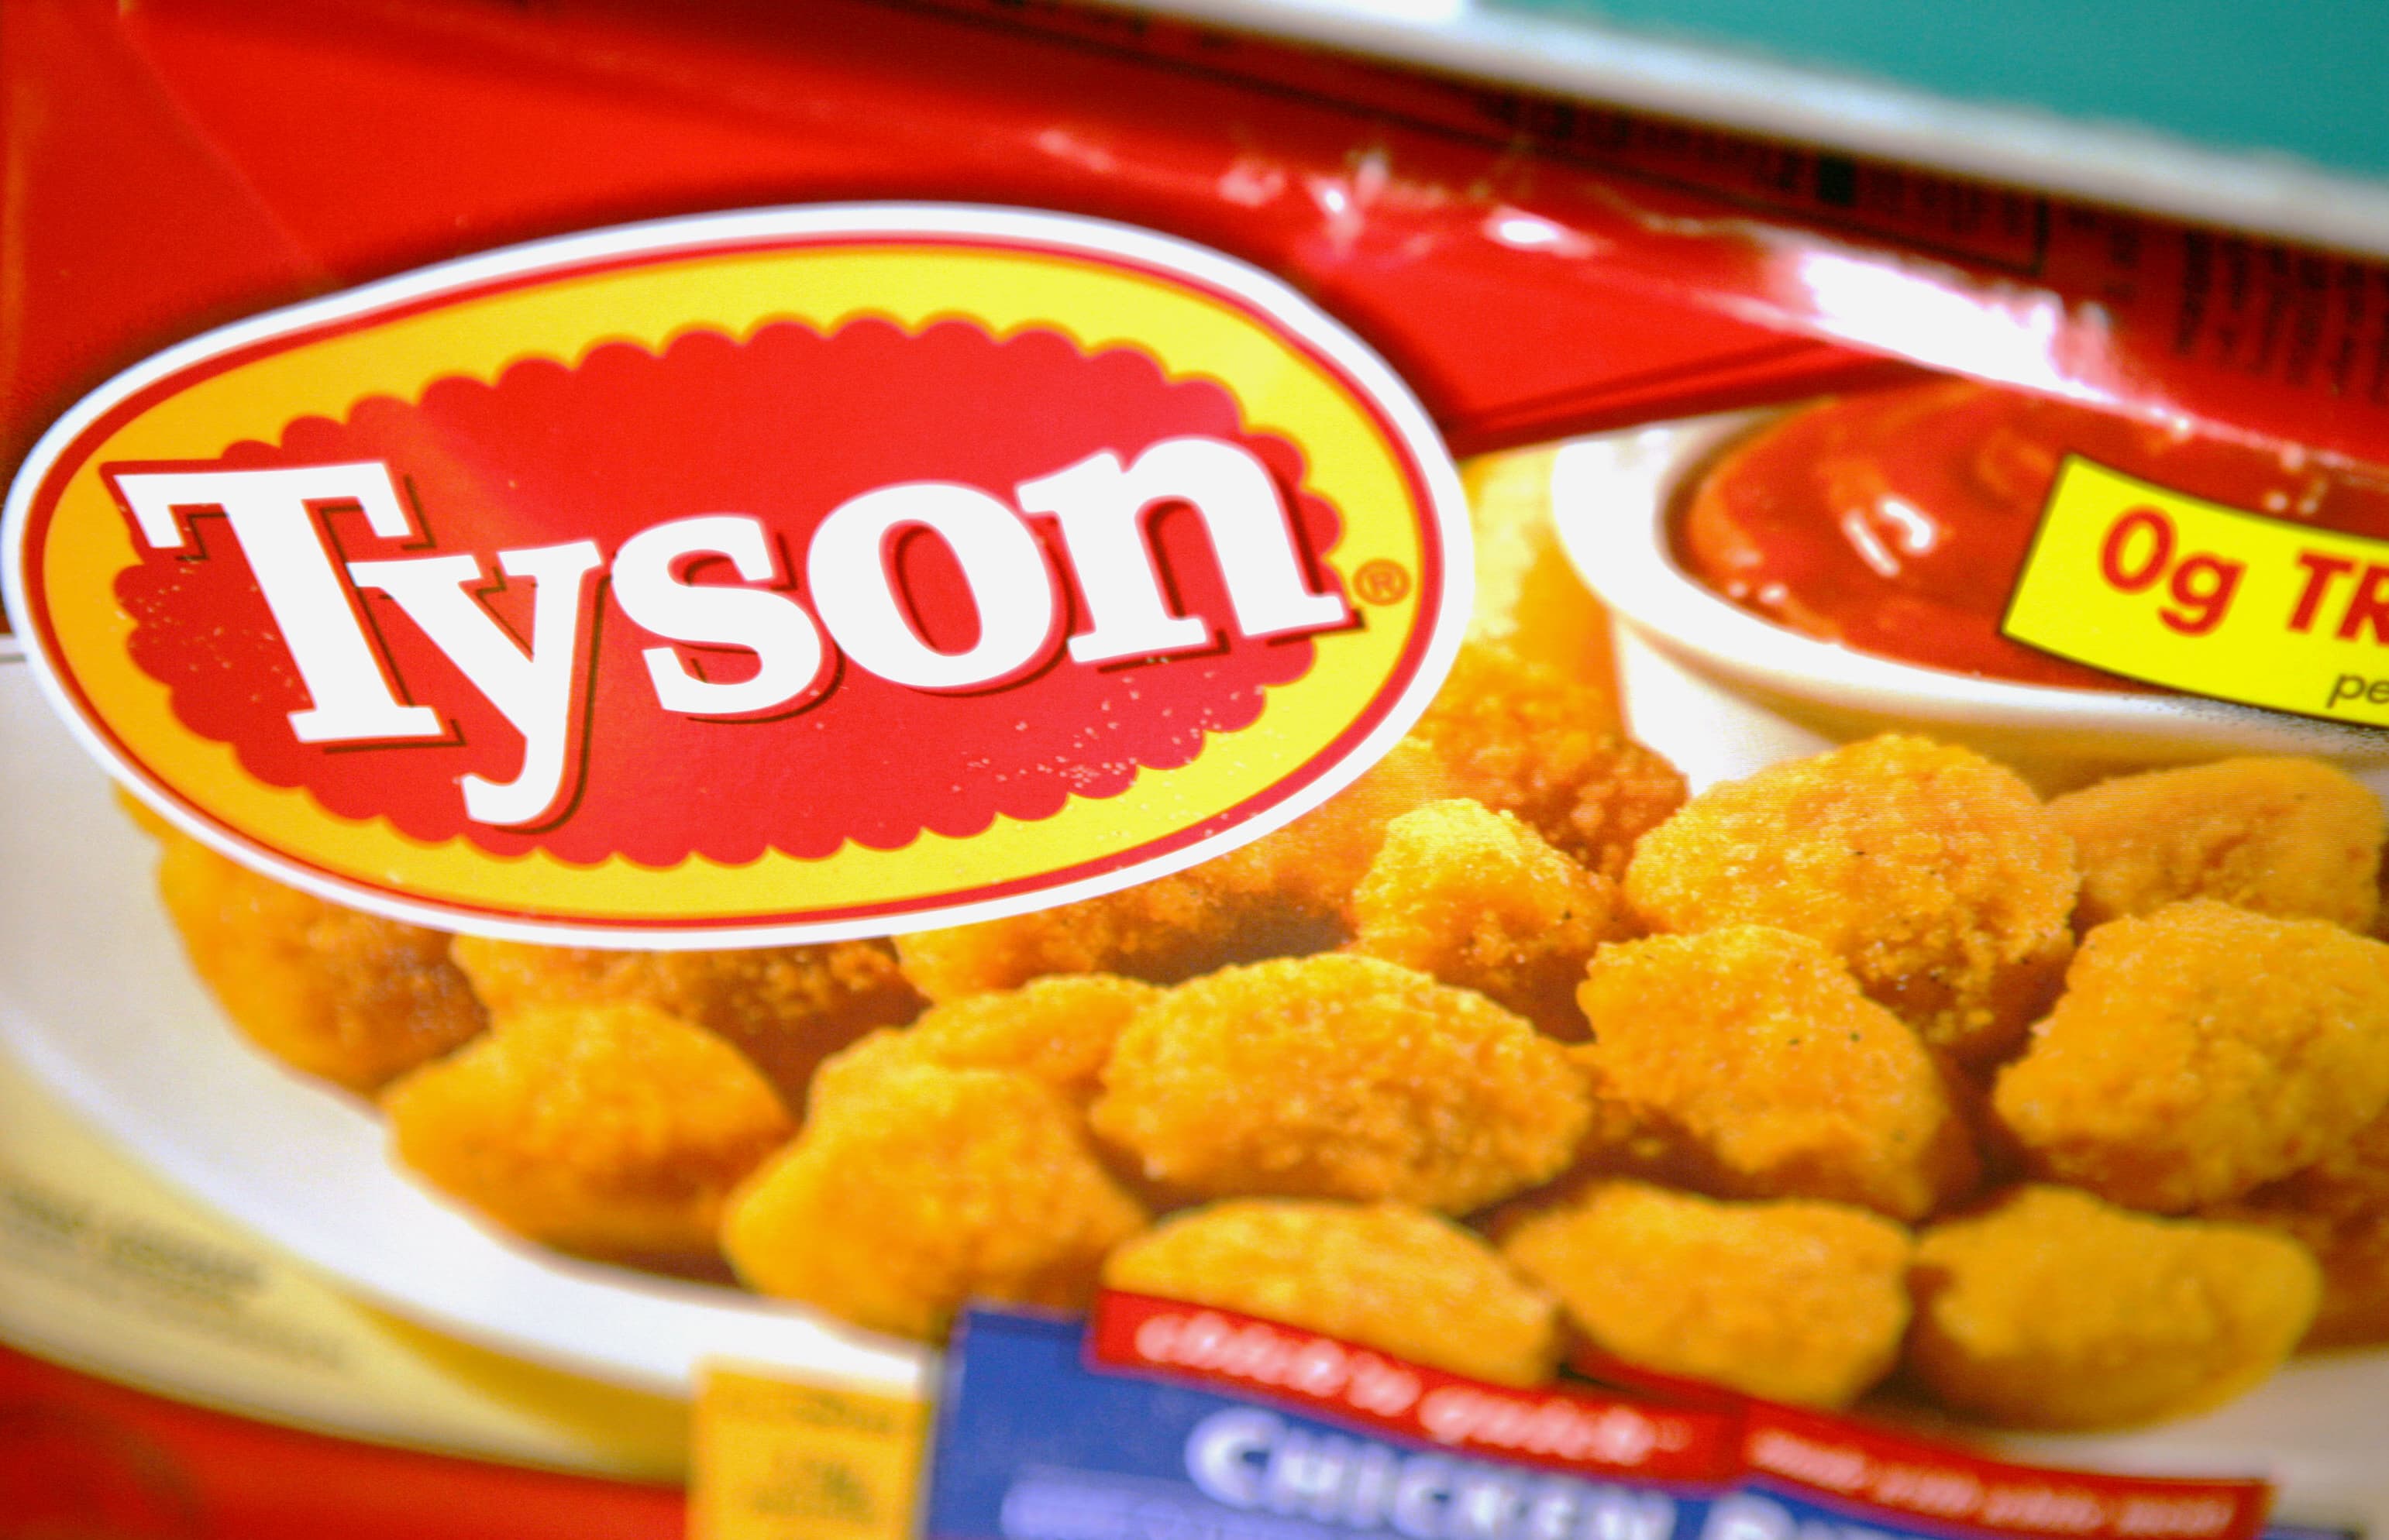 Goldman Sachs downgrades Tyson Foods, says poultry stock's trajectory is uncertain after latest earnings